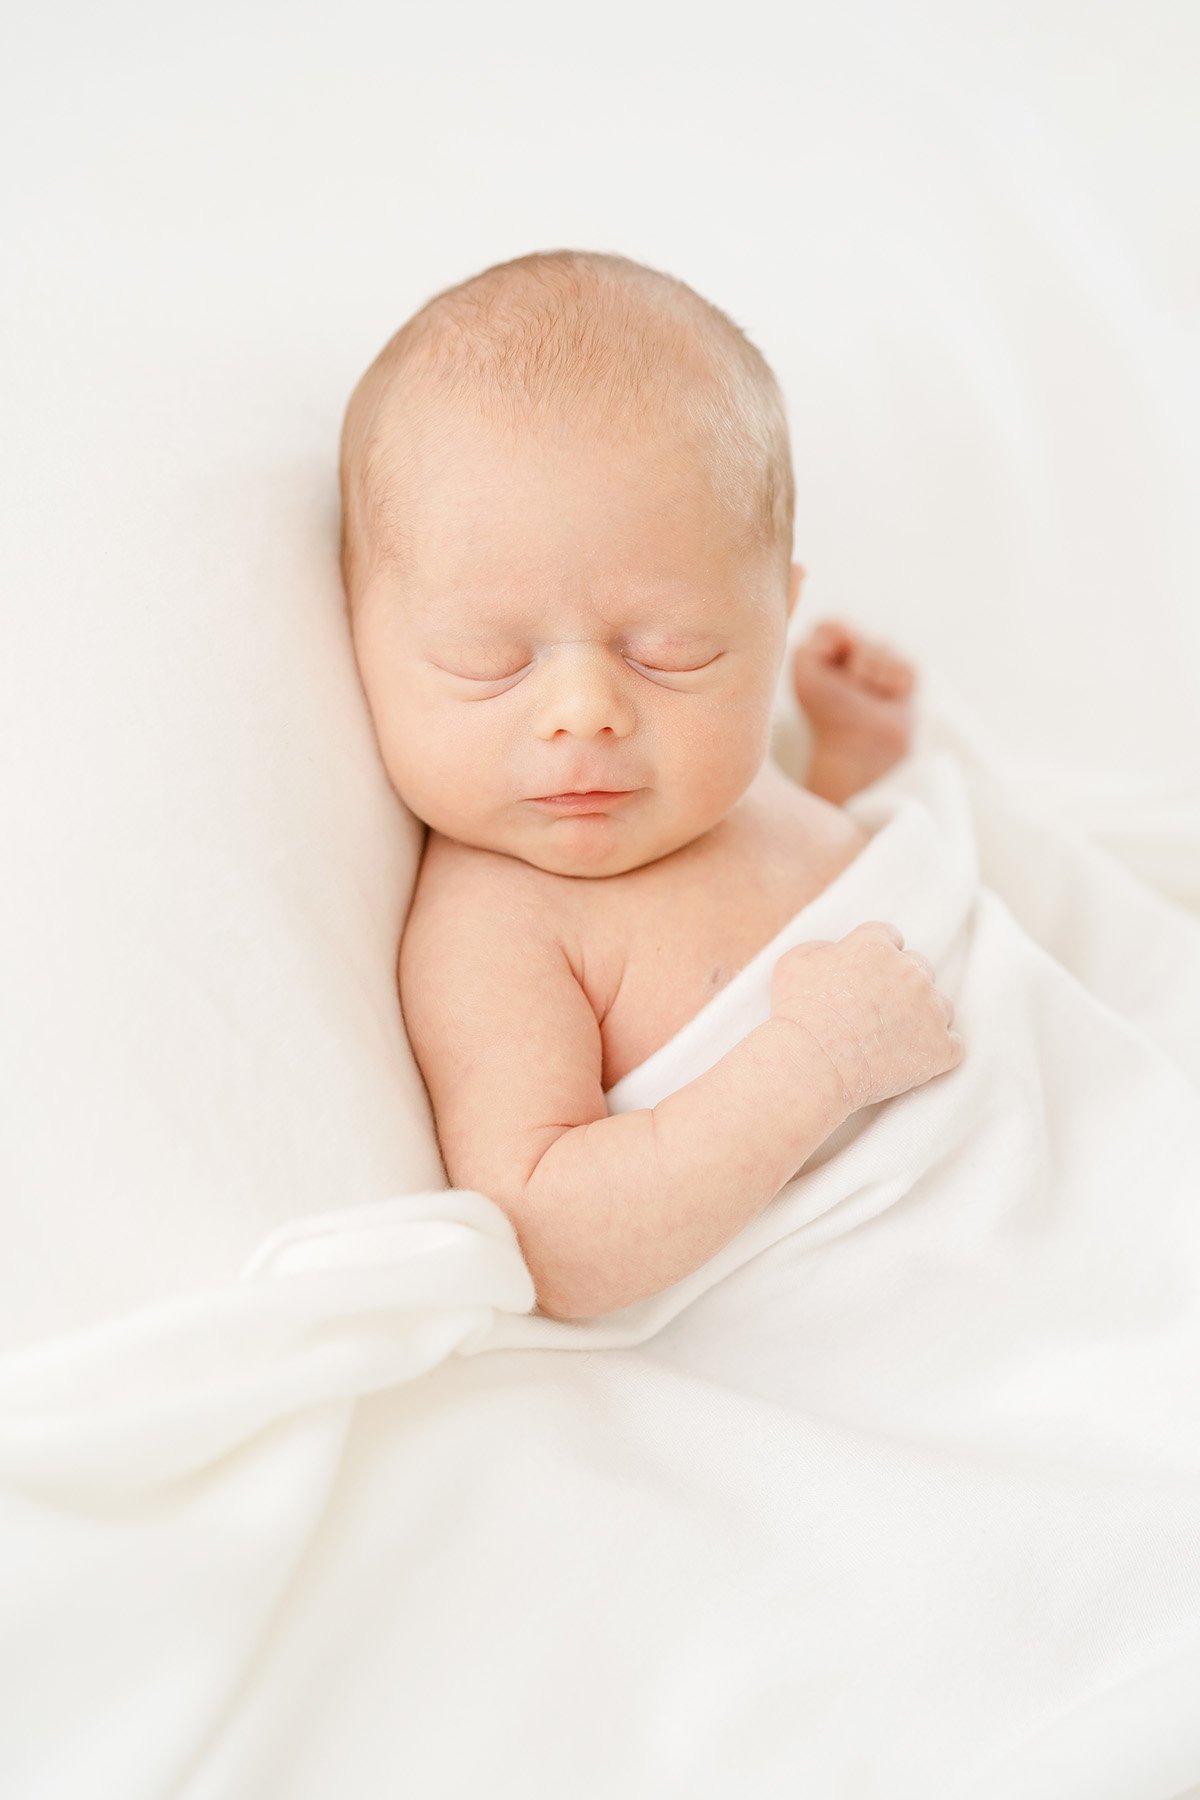 louisville-ky-southern-indiana-simple-newborn-photography-studio